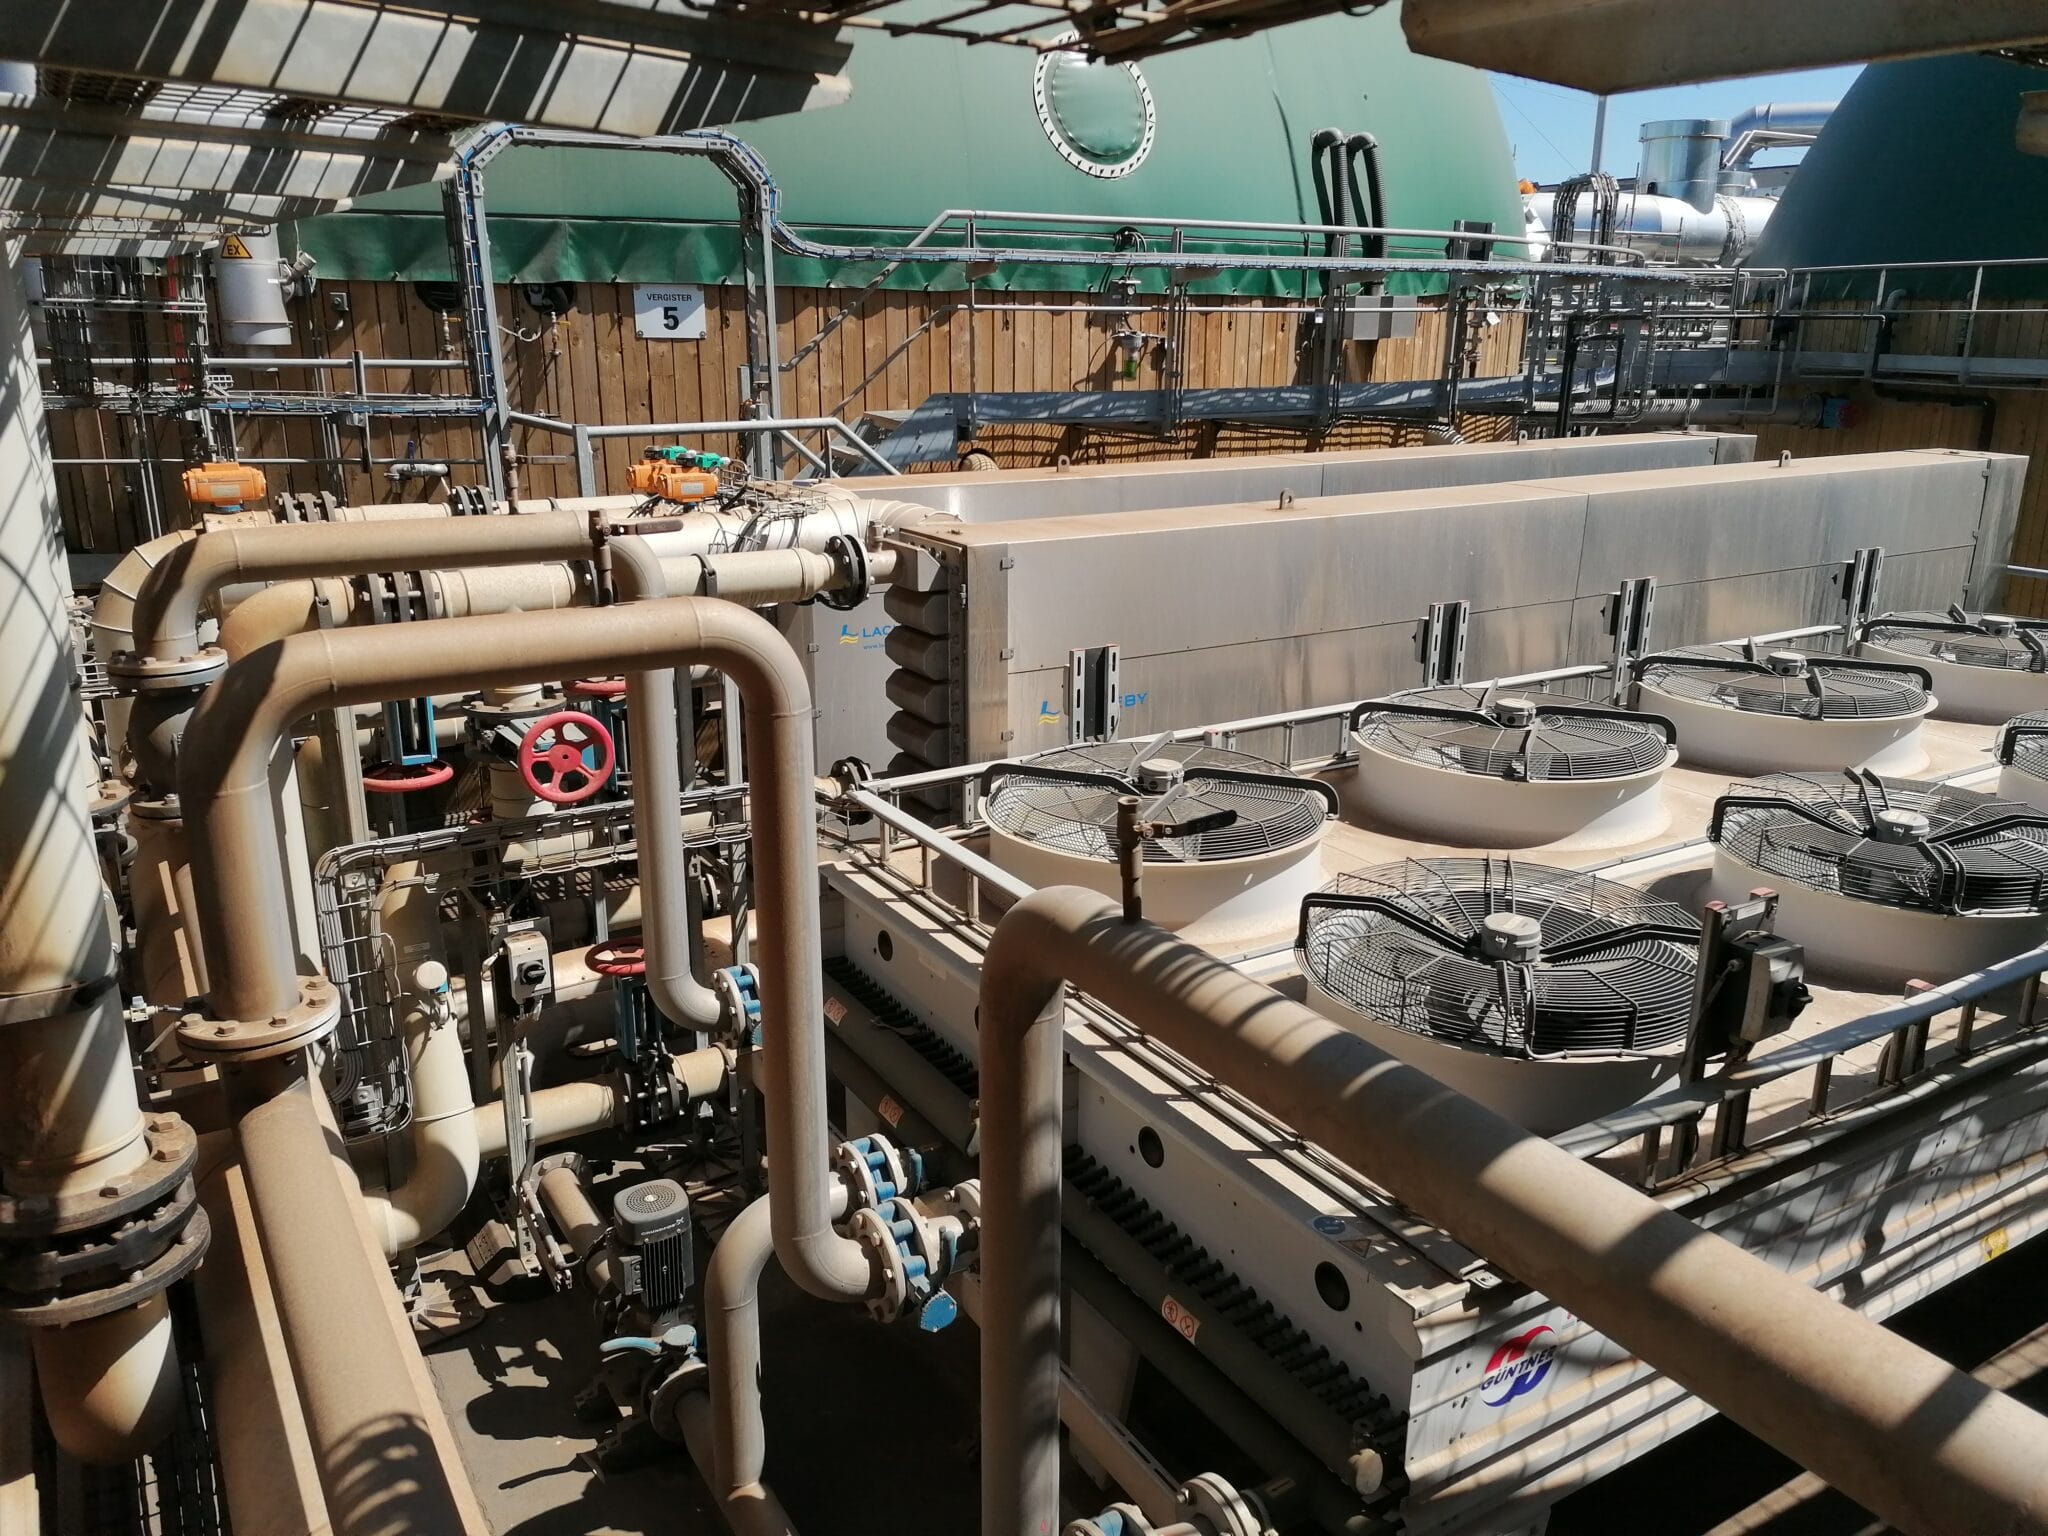 Read more about the article Heat exchangers from Lackeby Sweden in Europe’s largest biogas plant